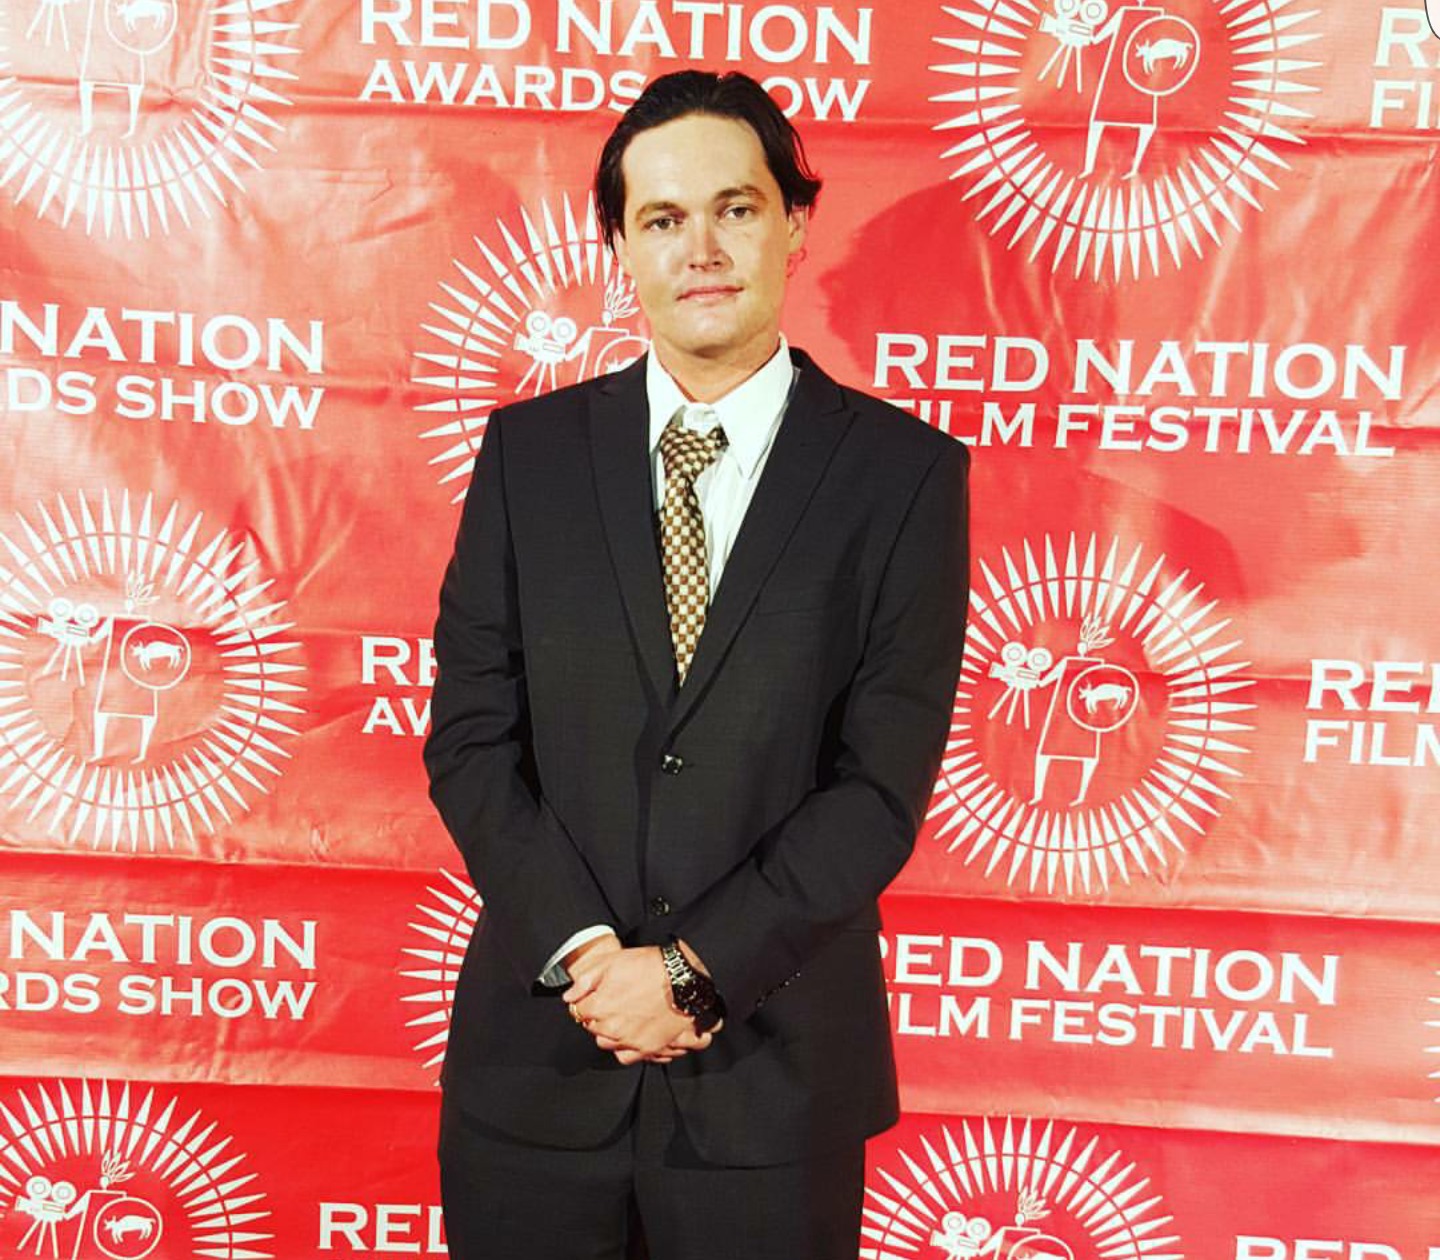 Michael D. Reynolds at the Red Nation Film Festival 2015.